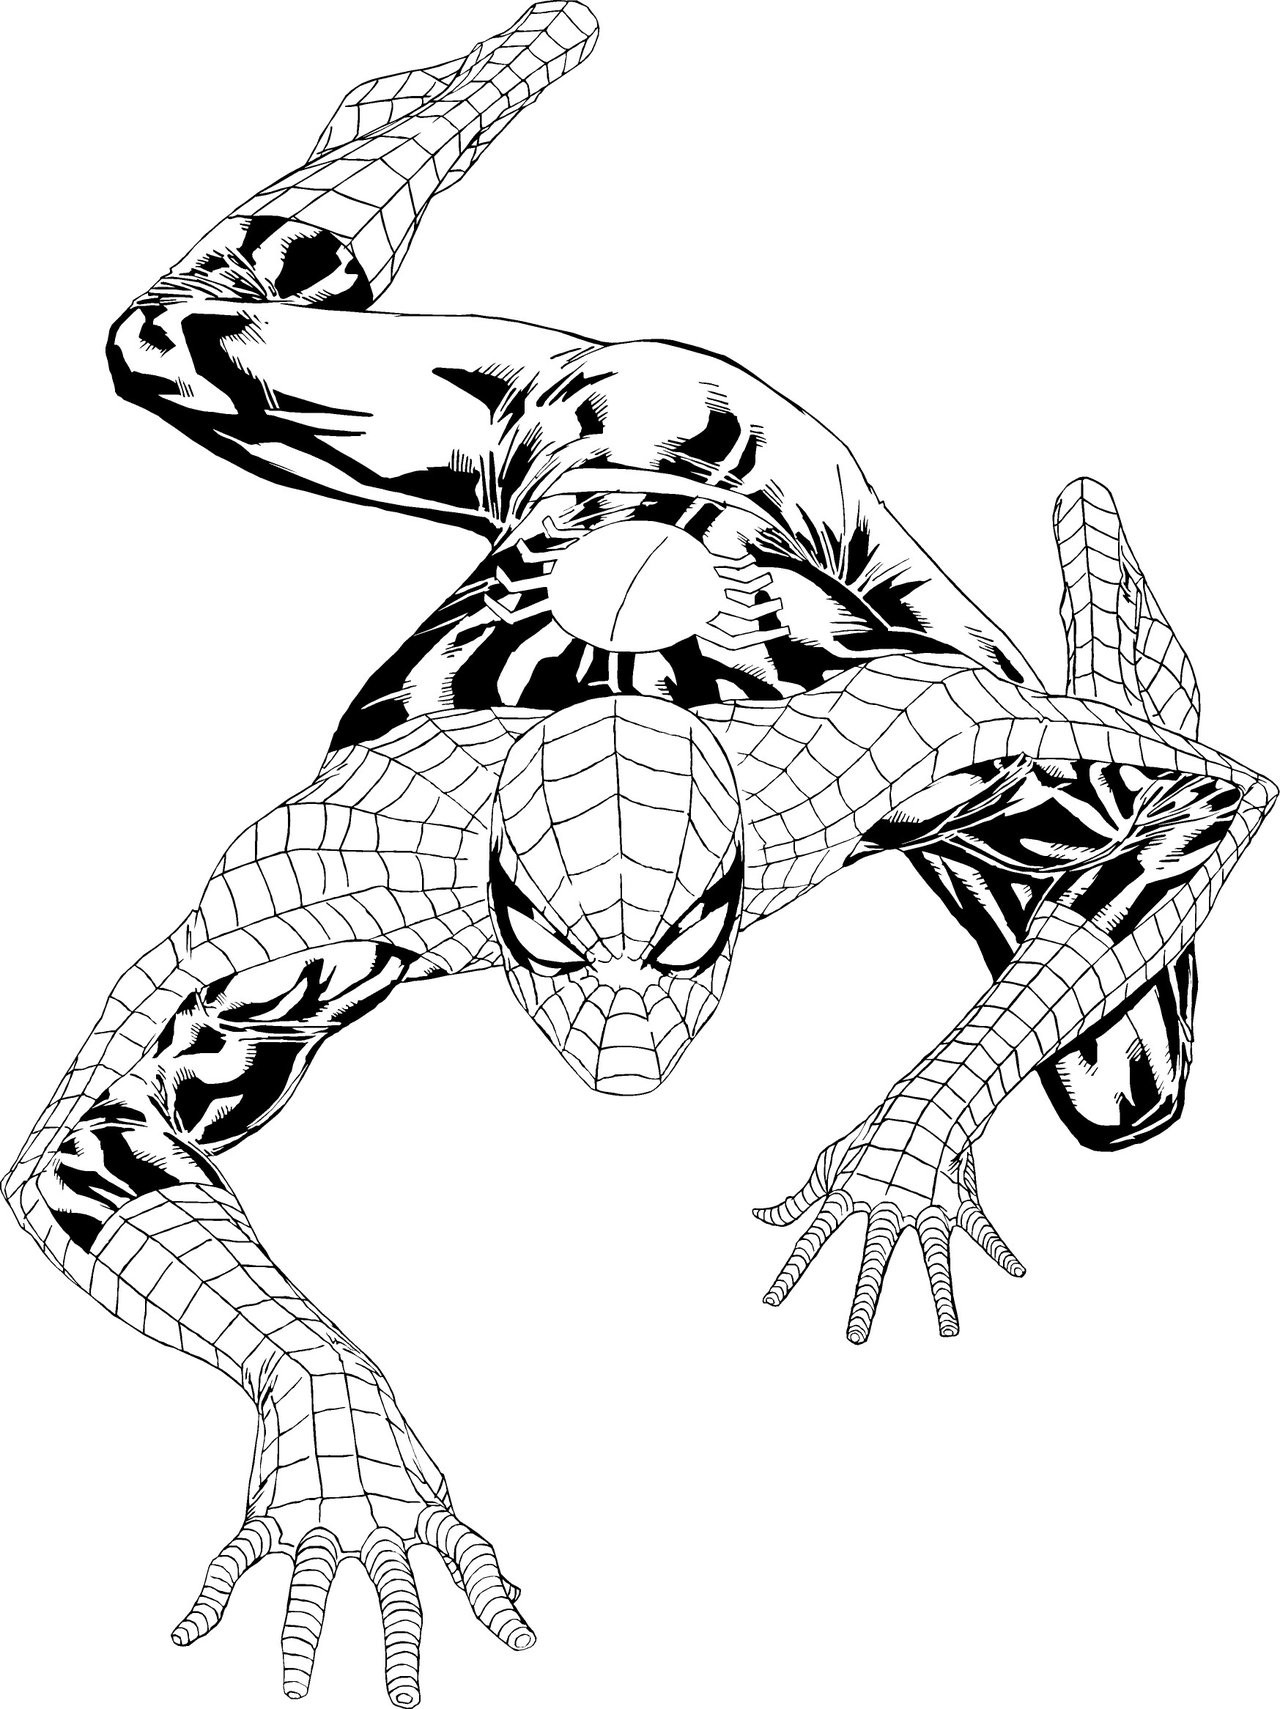 Spiderman Coloring Book Pages
 Free Printable Spiderman Coloring Pages For Kids